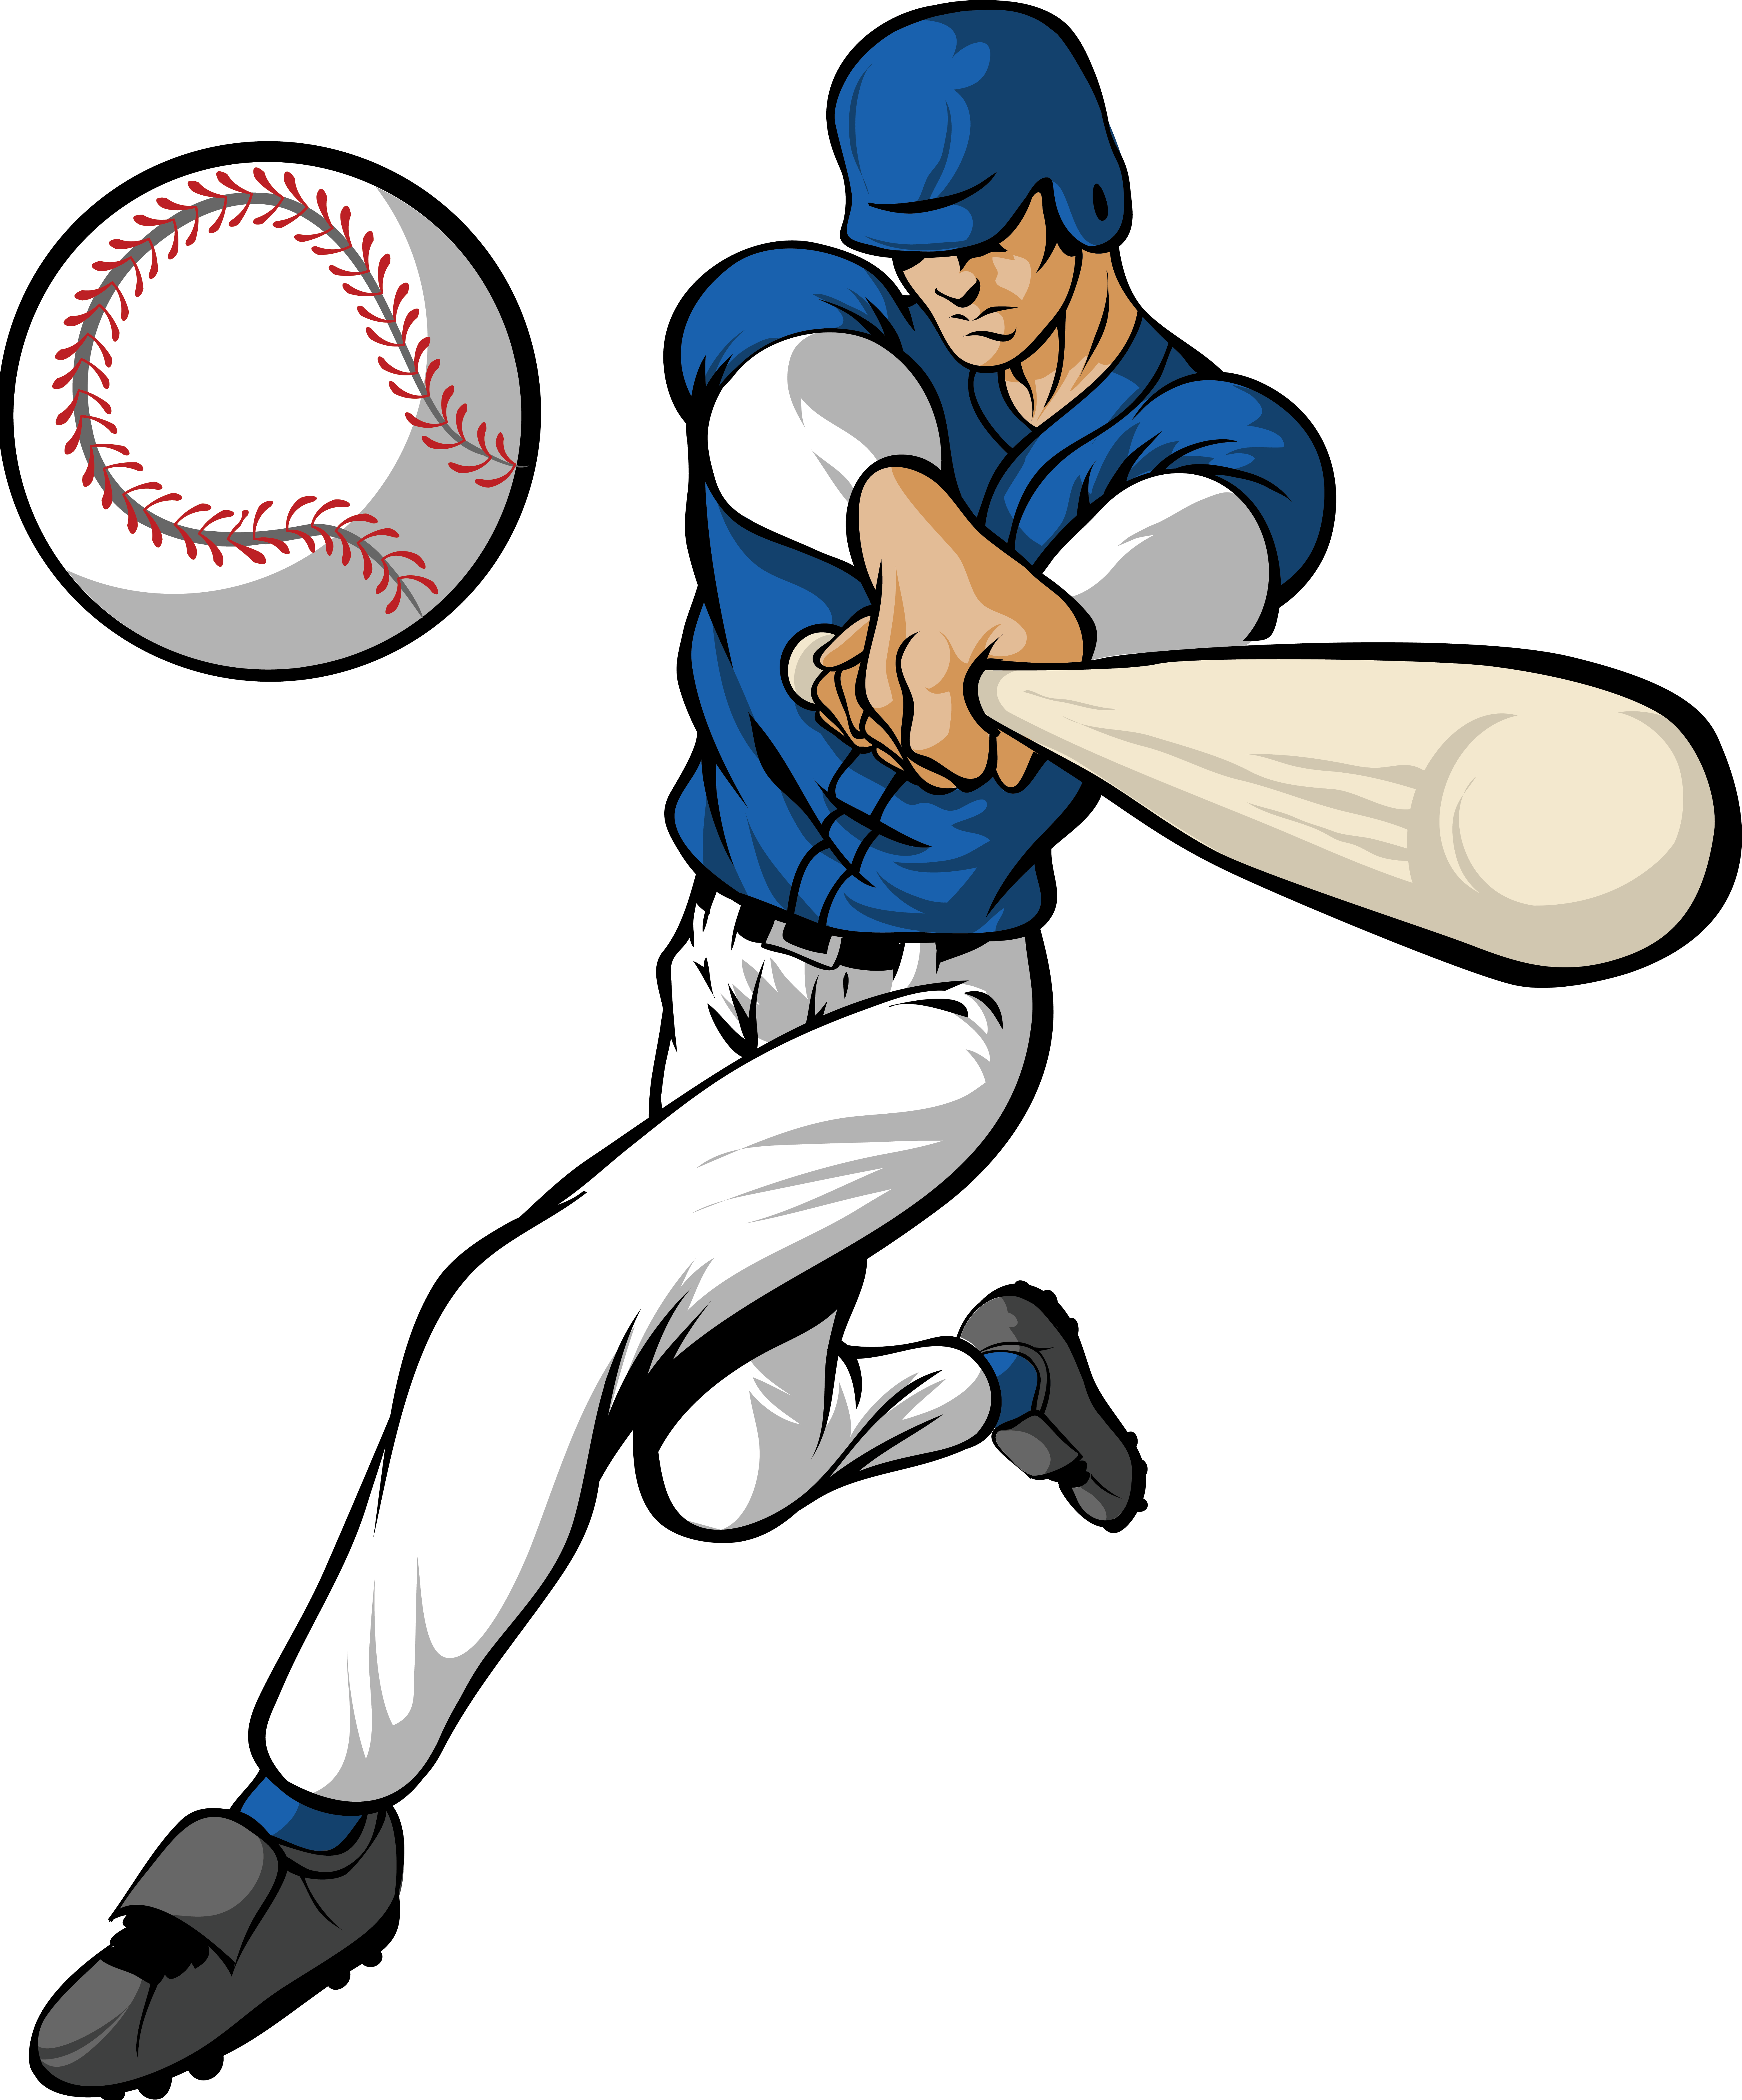 free clipart of a baseball player - photo #18